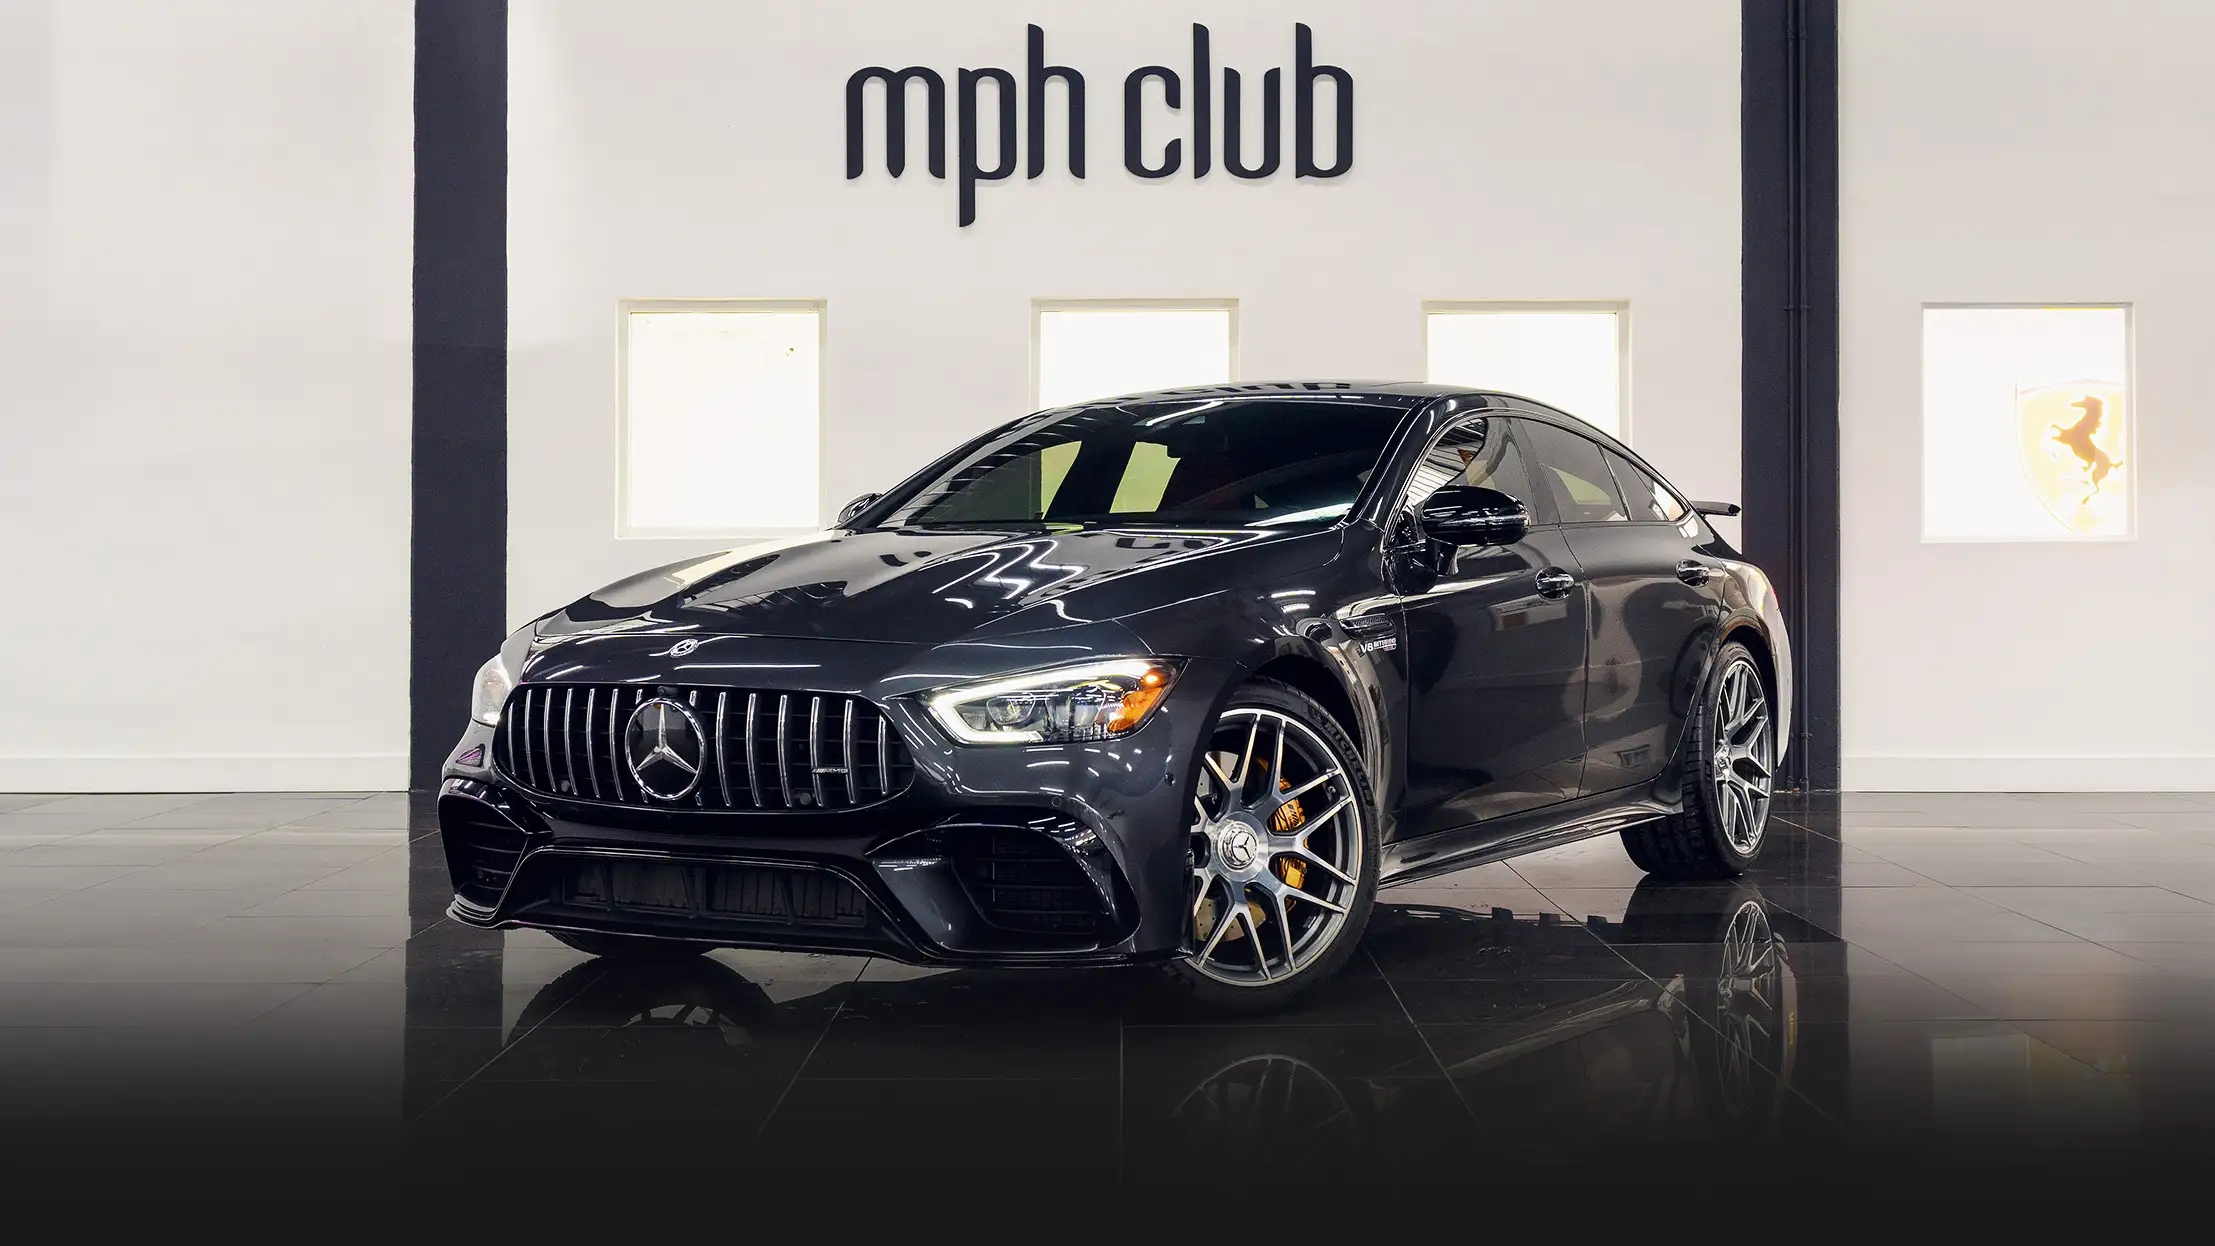 Grey on red Mercedes Benz GT 63 rental profile view mph club